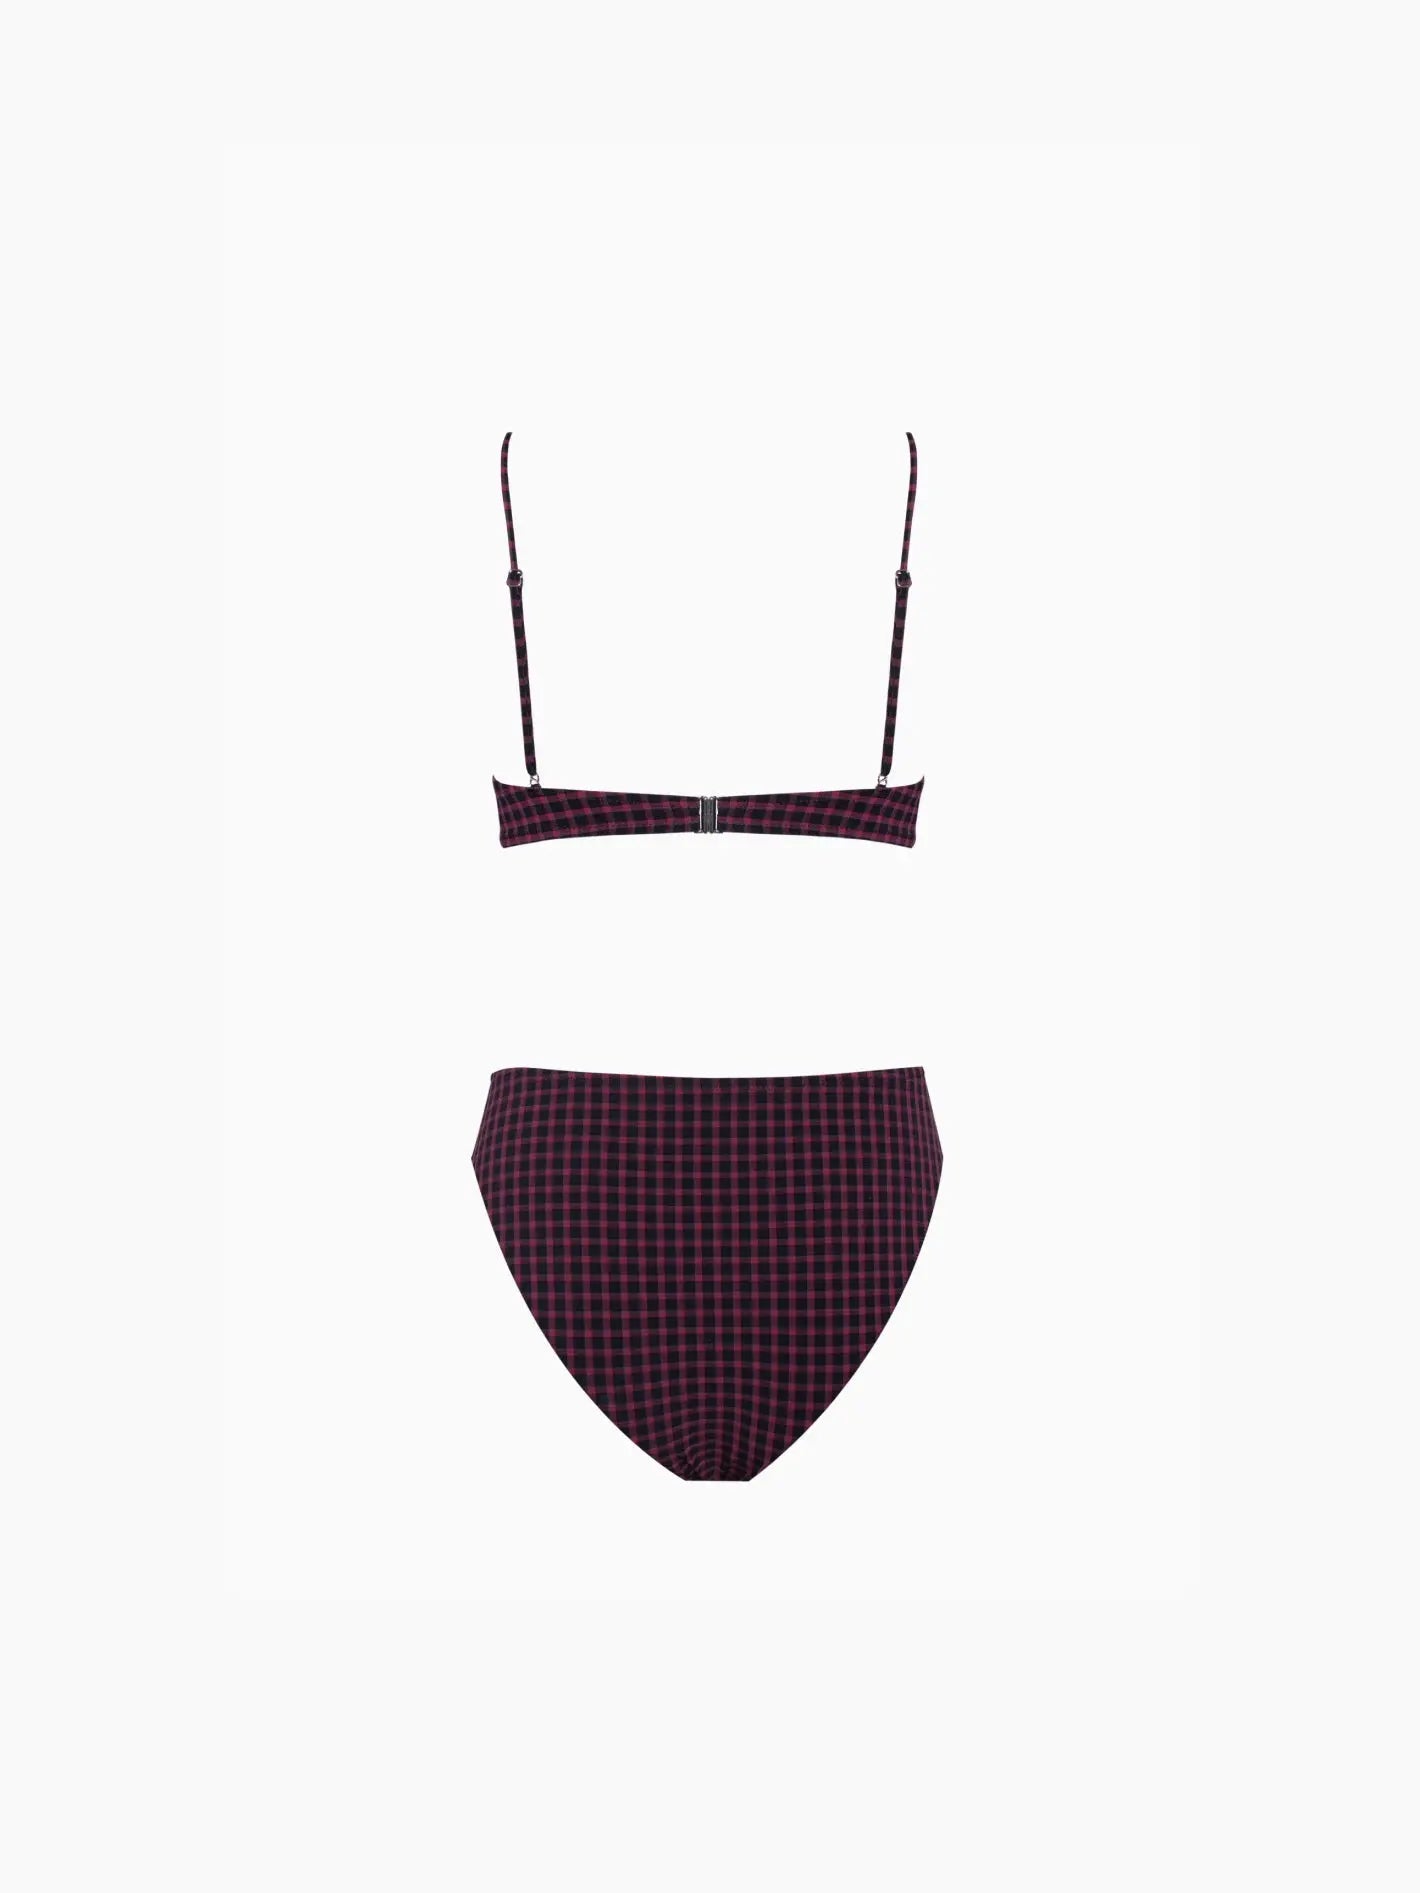 A chic Cleo Bikini Violet with a purple and black checkered pattern, exclusively available at Bassalstore in Barcelona. The top features thin spaghetti straps and a small cut-out in the center, while the bottoms showcase a high-cut leg design. The swimsuit is displayed against a plain white background by Pale.